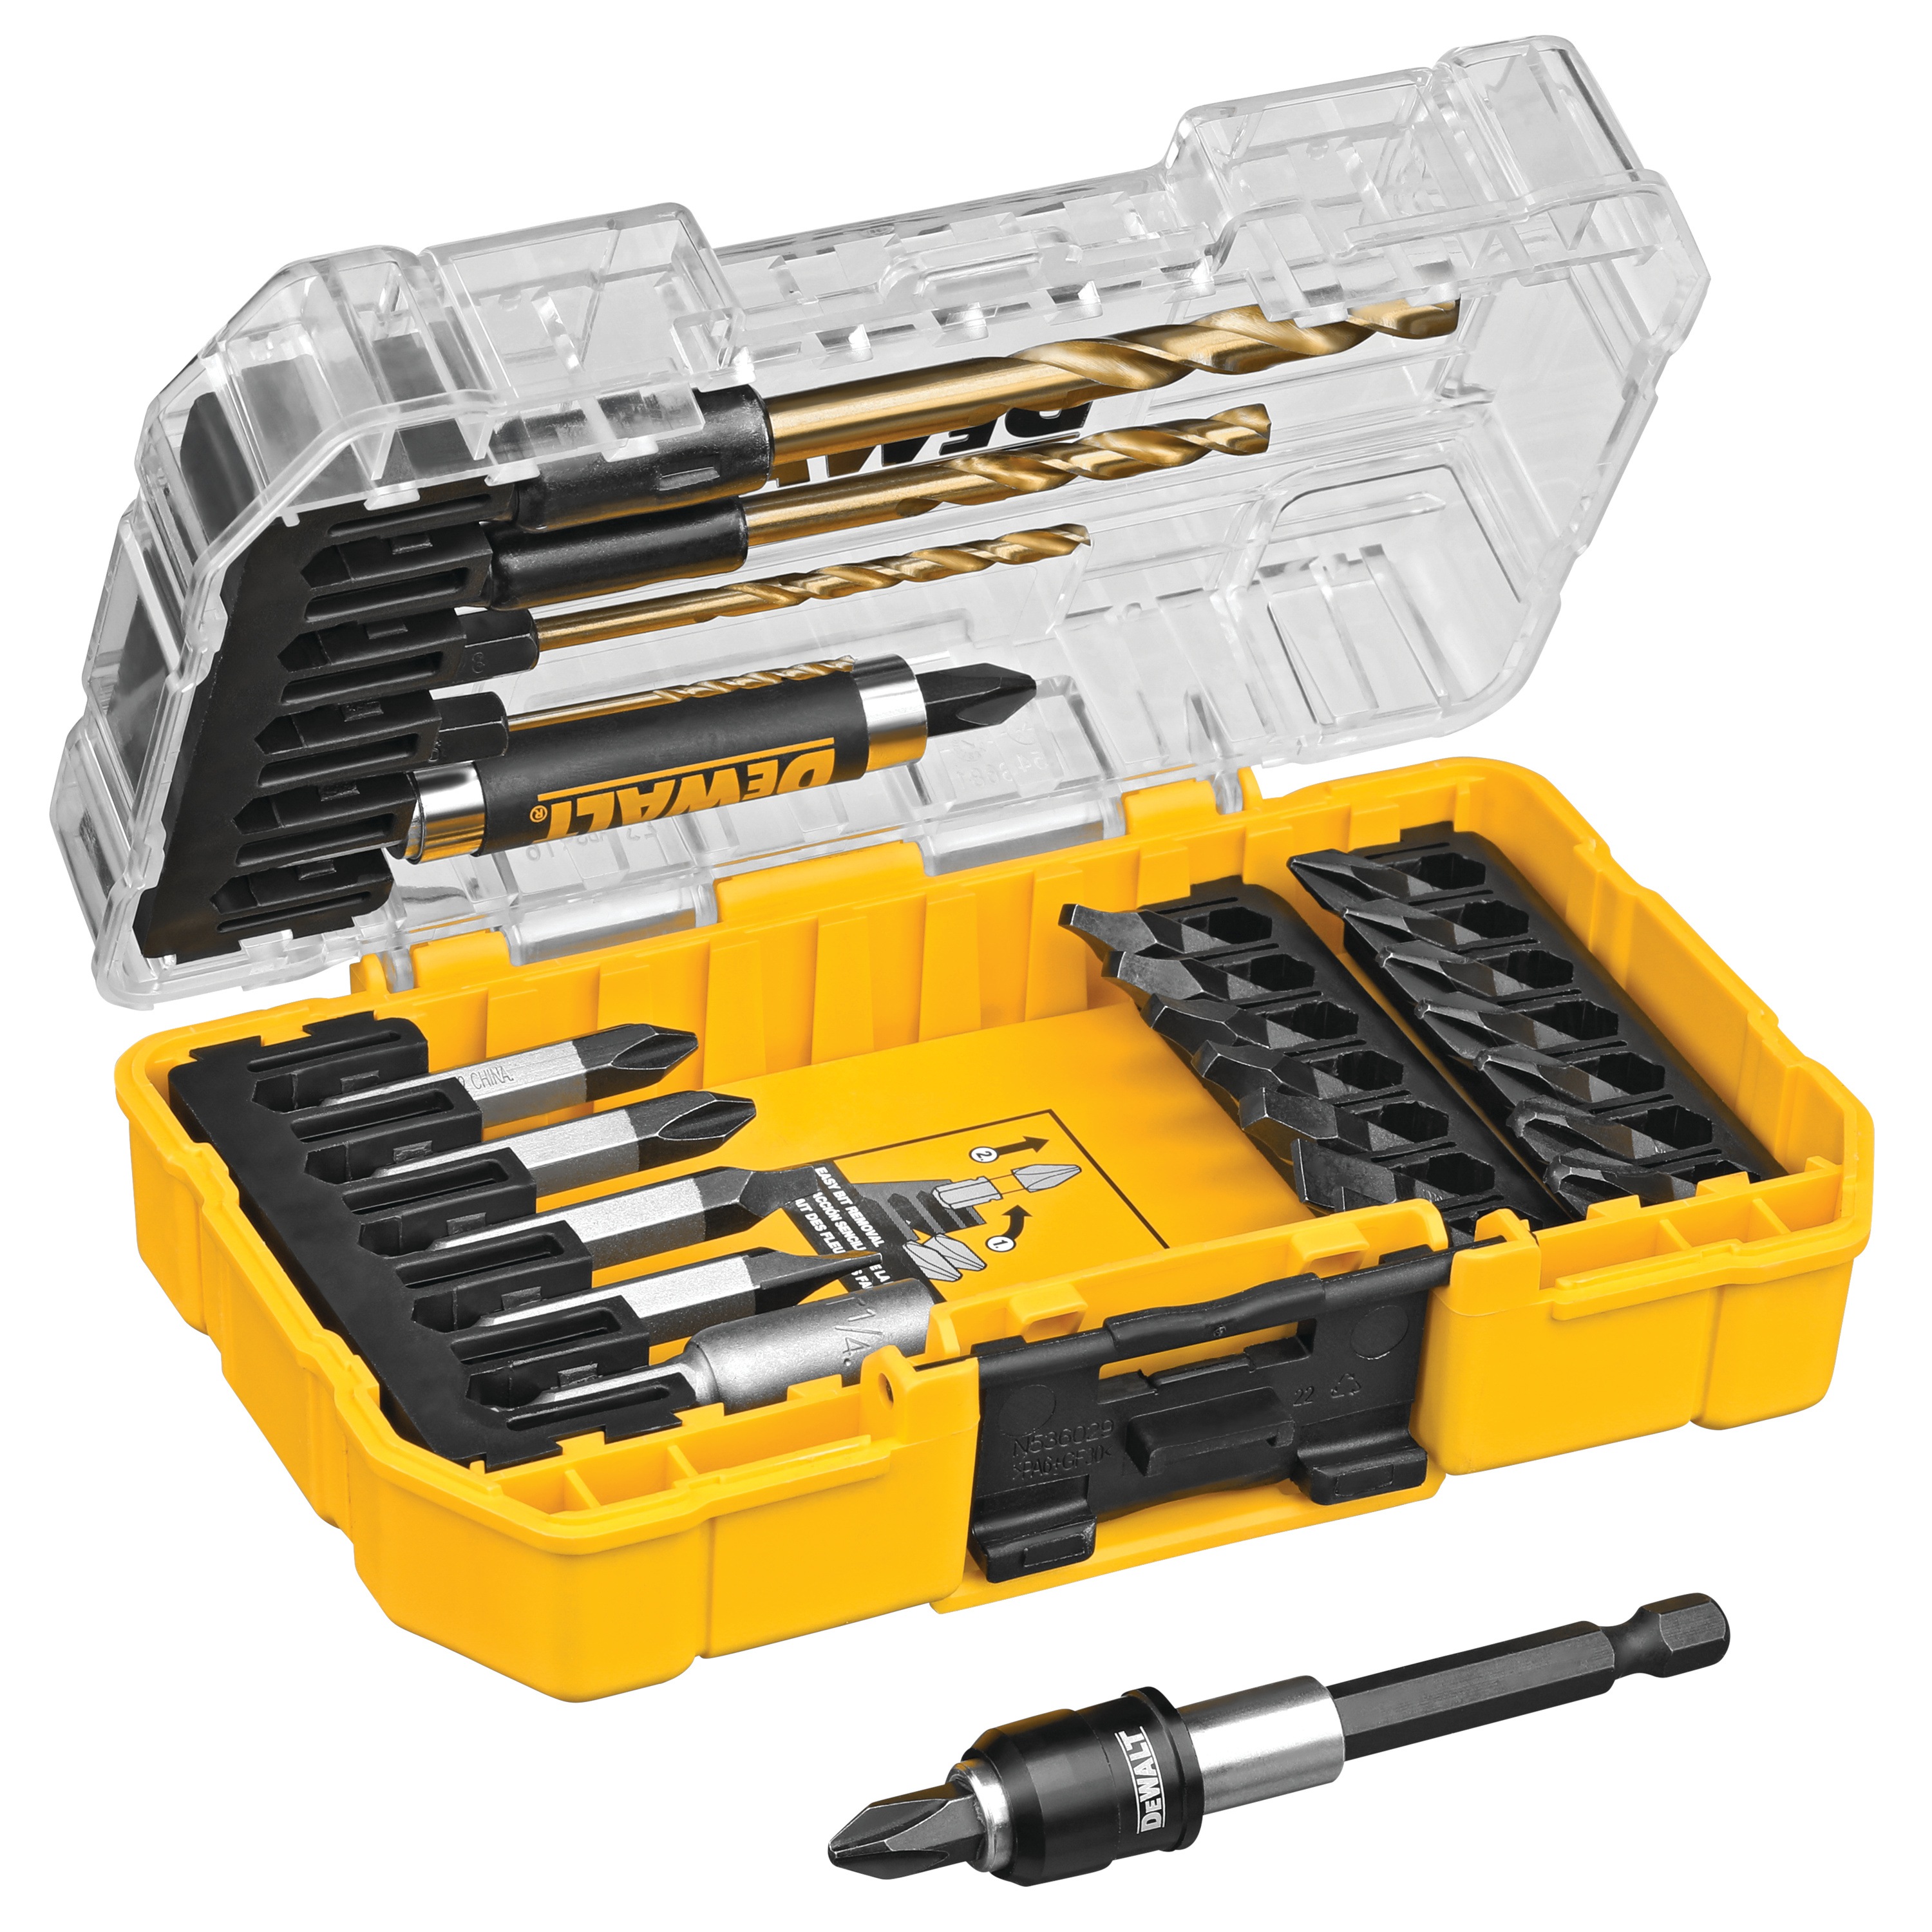 Profile of 27 pieces tough grip screwdriving bit sets with tough case plus system with the case open.